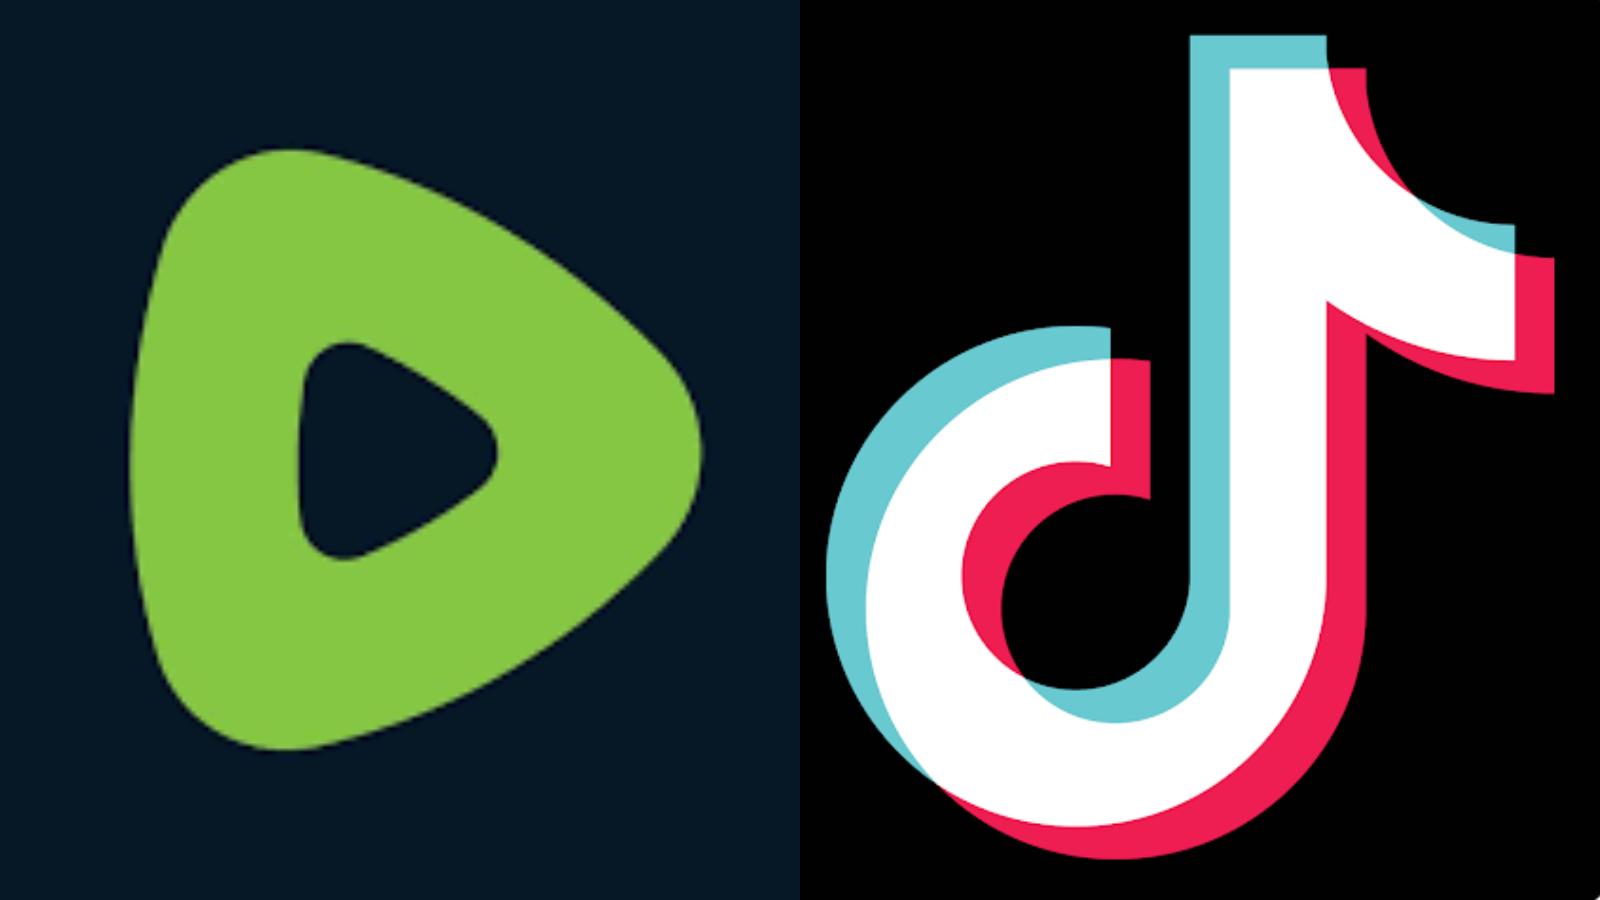 rumble and tiktok logos side by side